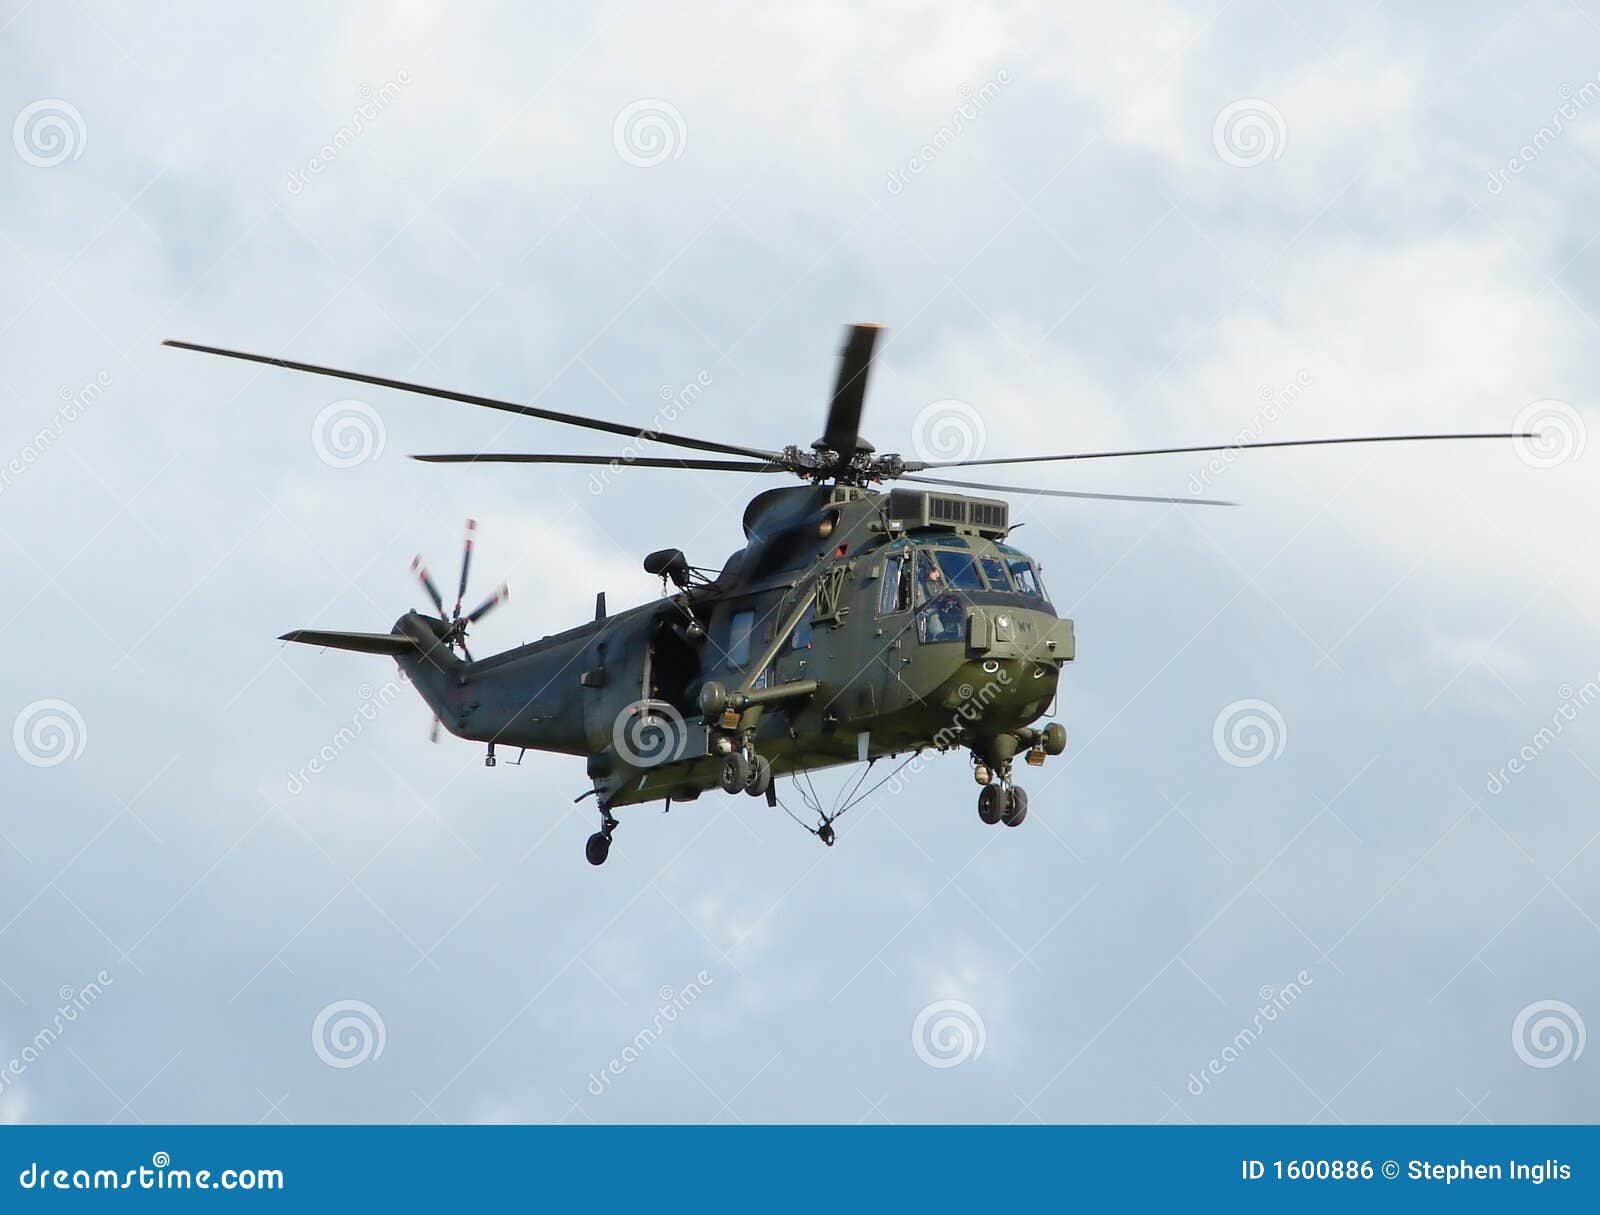 military helicopter hovering